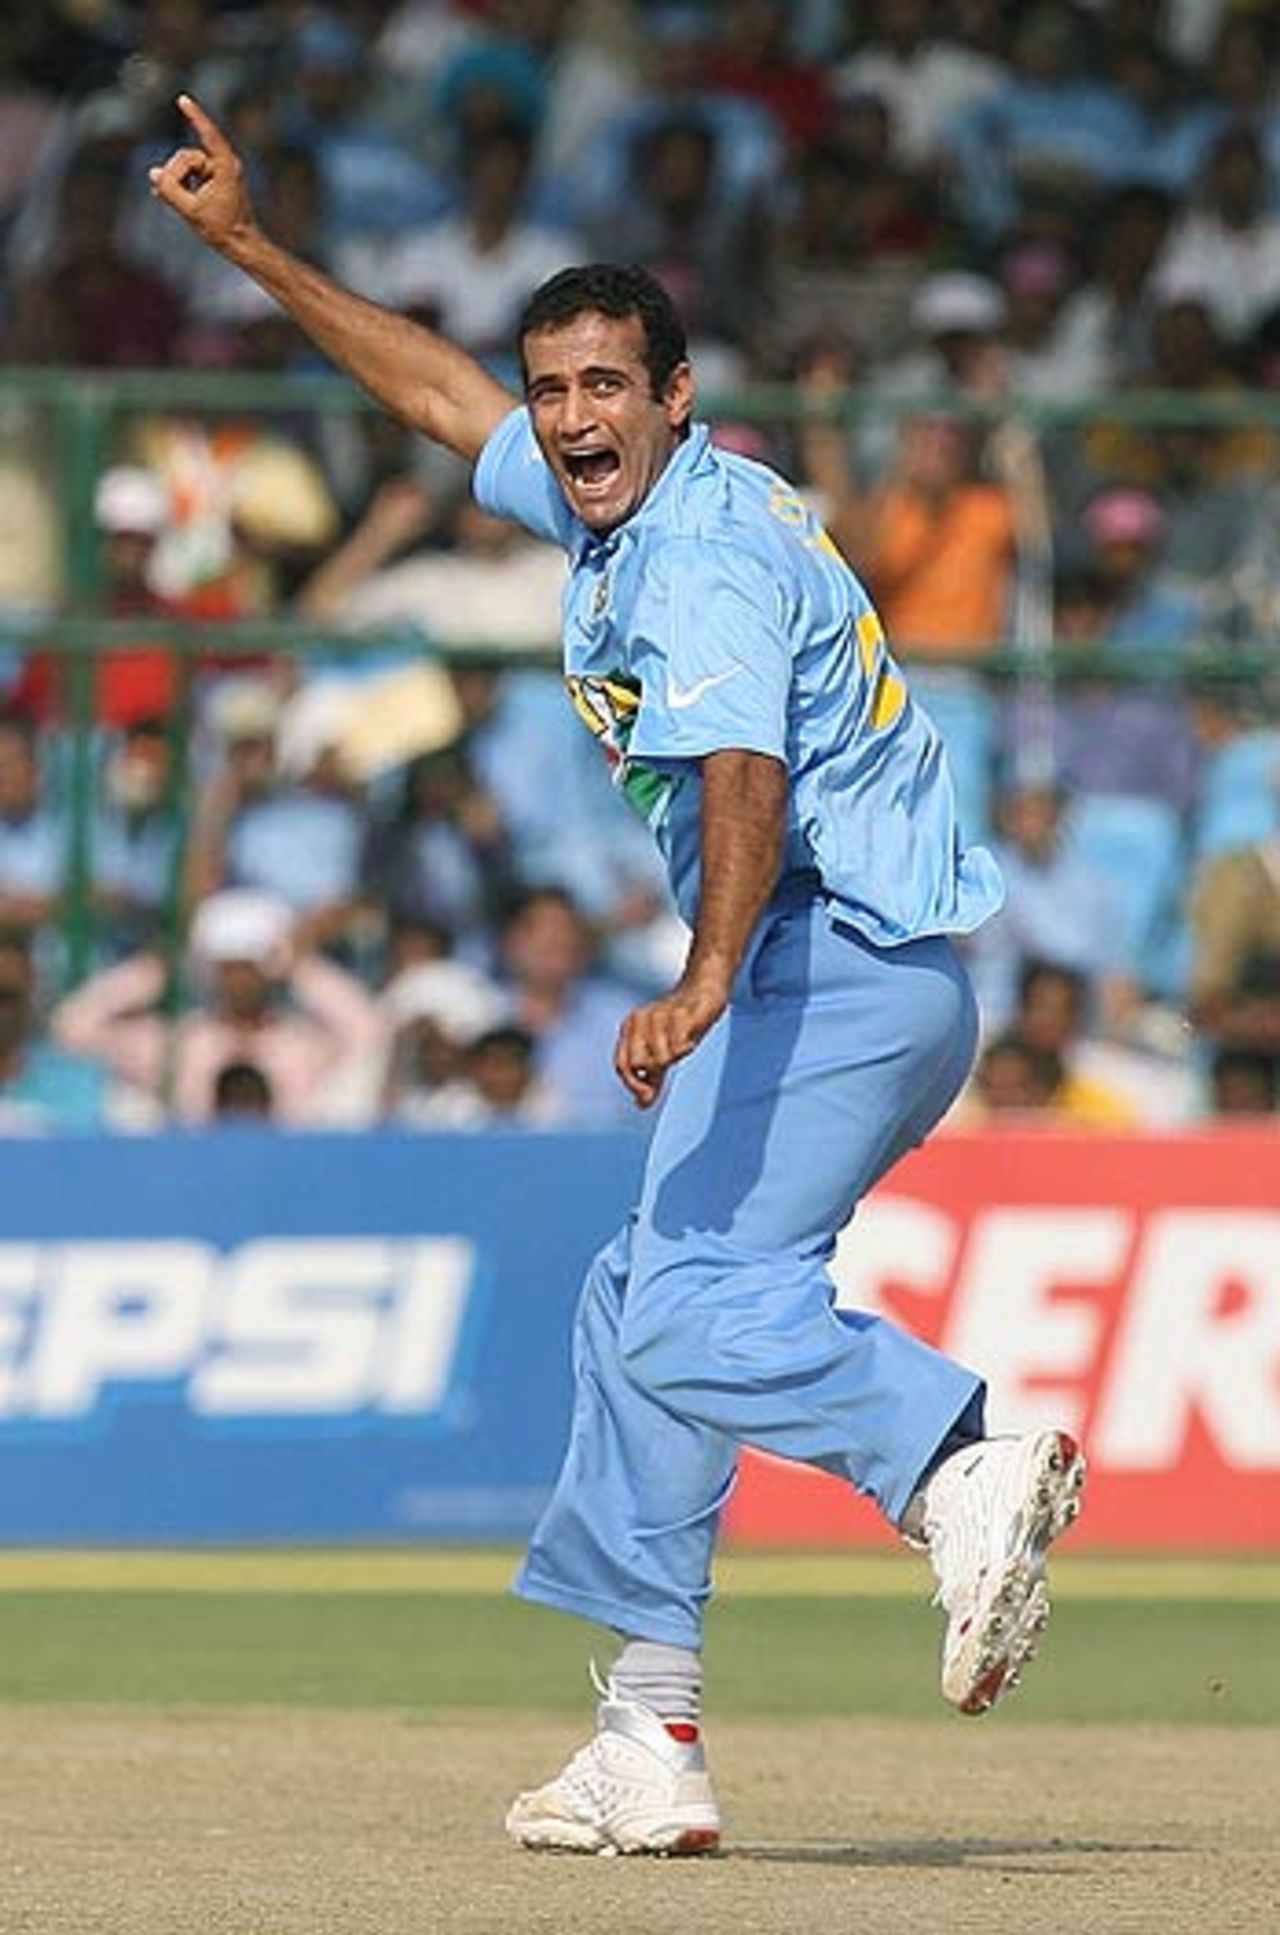 Irfan Pathan successfully appeals for the wicket of Andrew Flintoff , India v England, 1st match, Champions Trophy, Sawai Mansingh Stadium, Jaipur, October 15, 2006